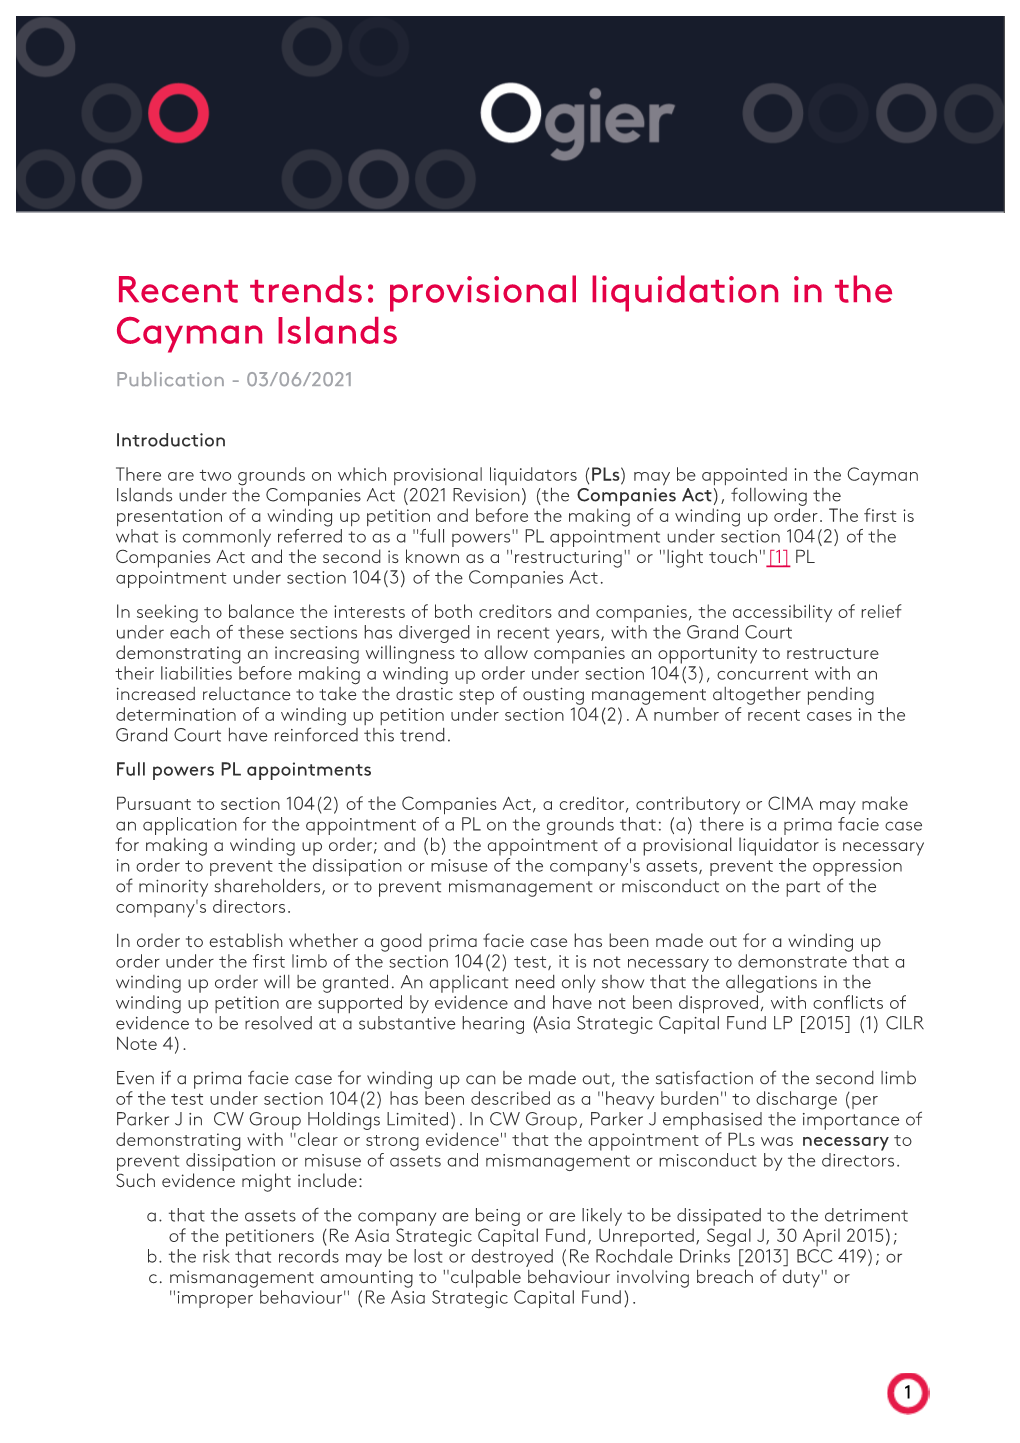 Provisional Liquidation in the Cayman Islands Publication - 03/06/2021